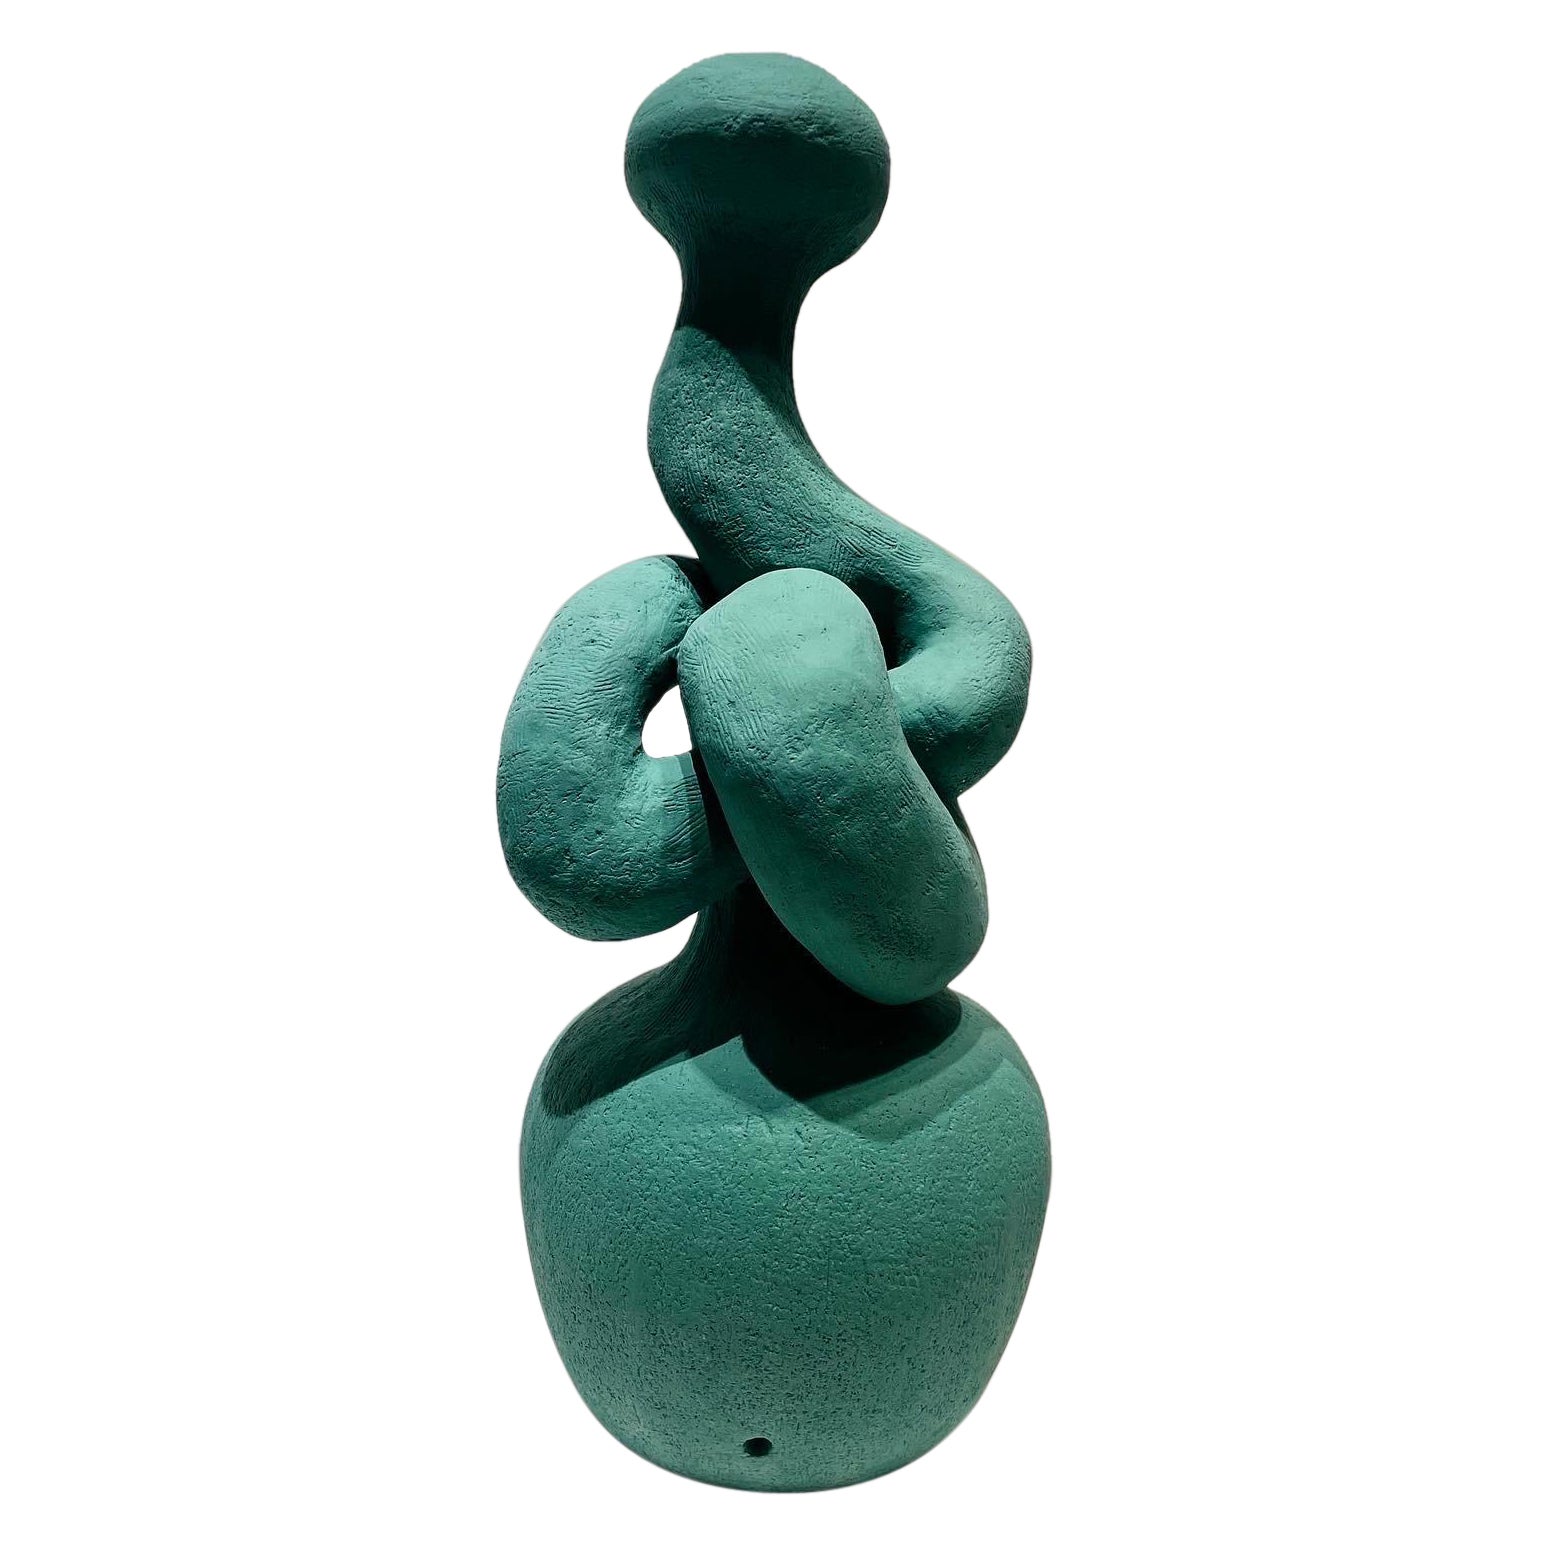 Knot Table Sculpture or Lamp, in Wintergreen, Handmade by Artist Stef Duffy For Sale